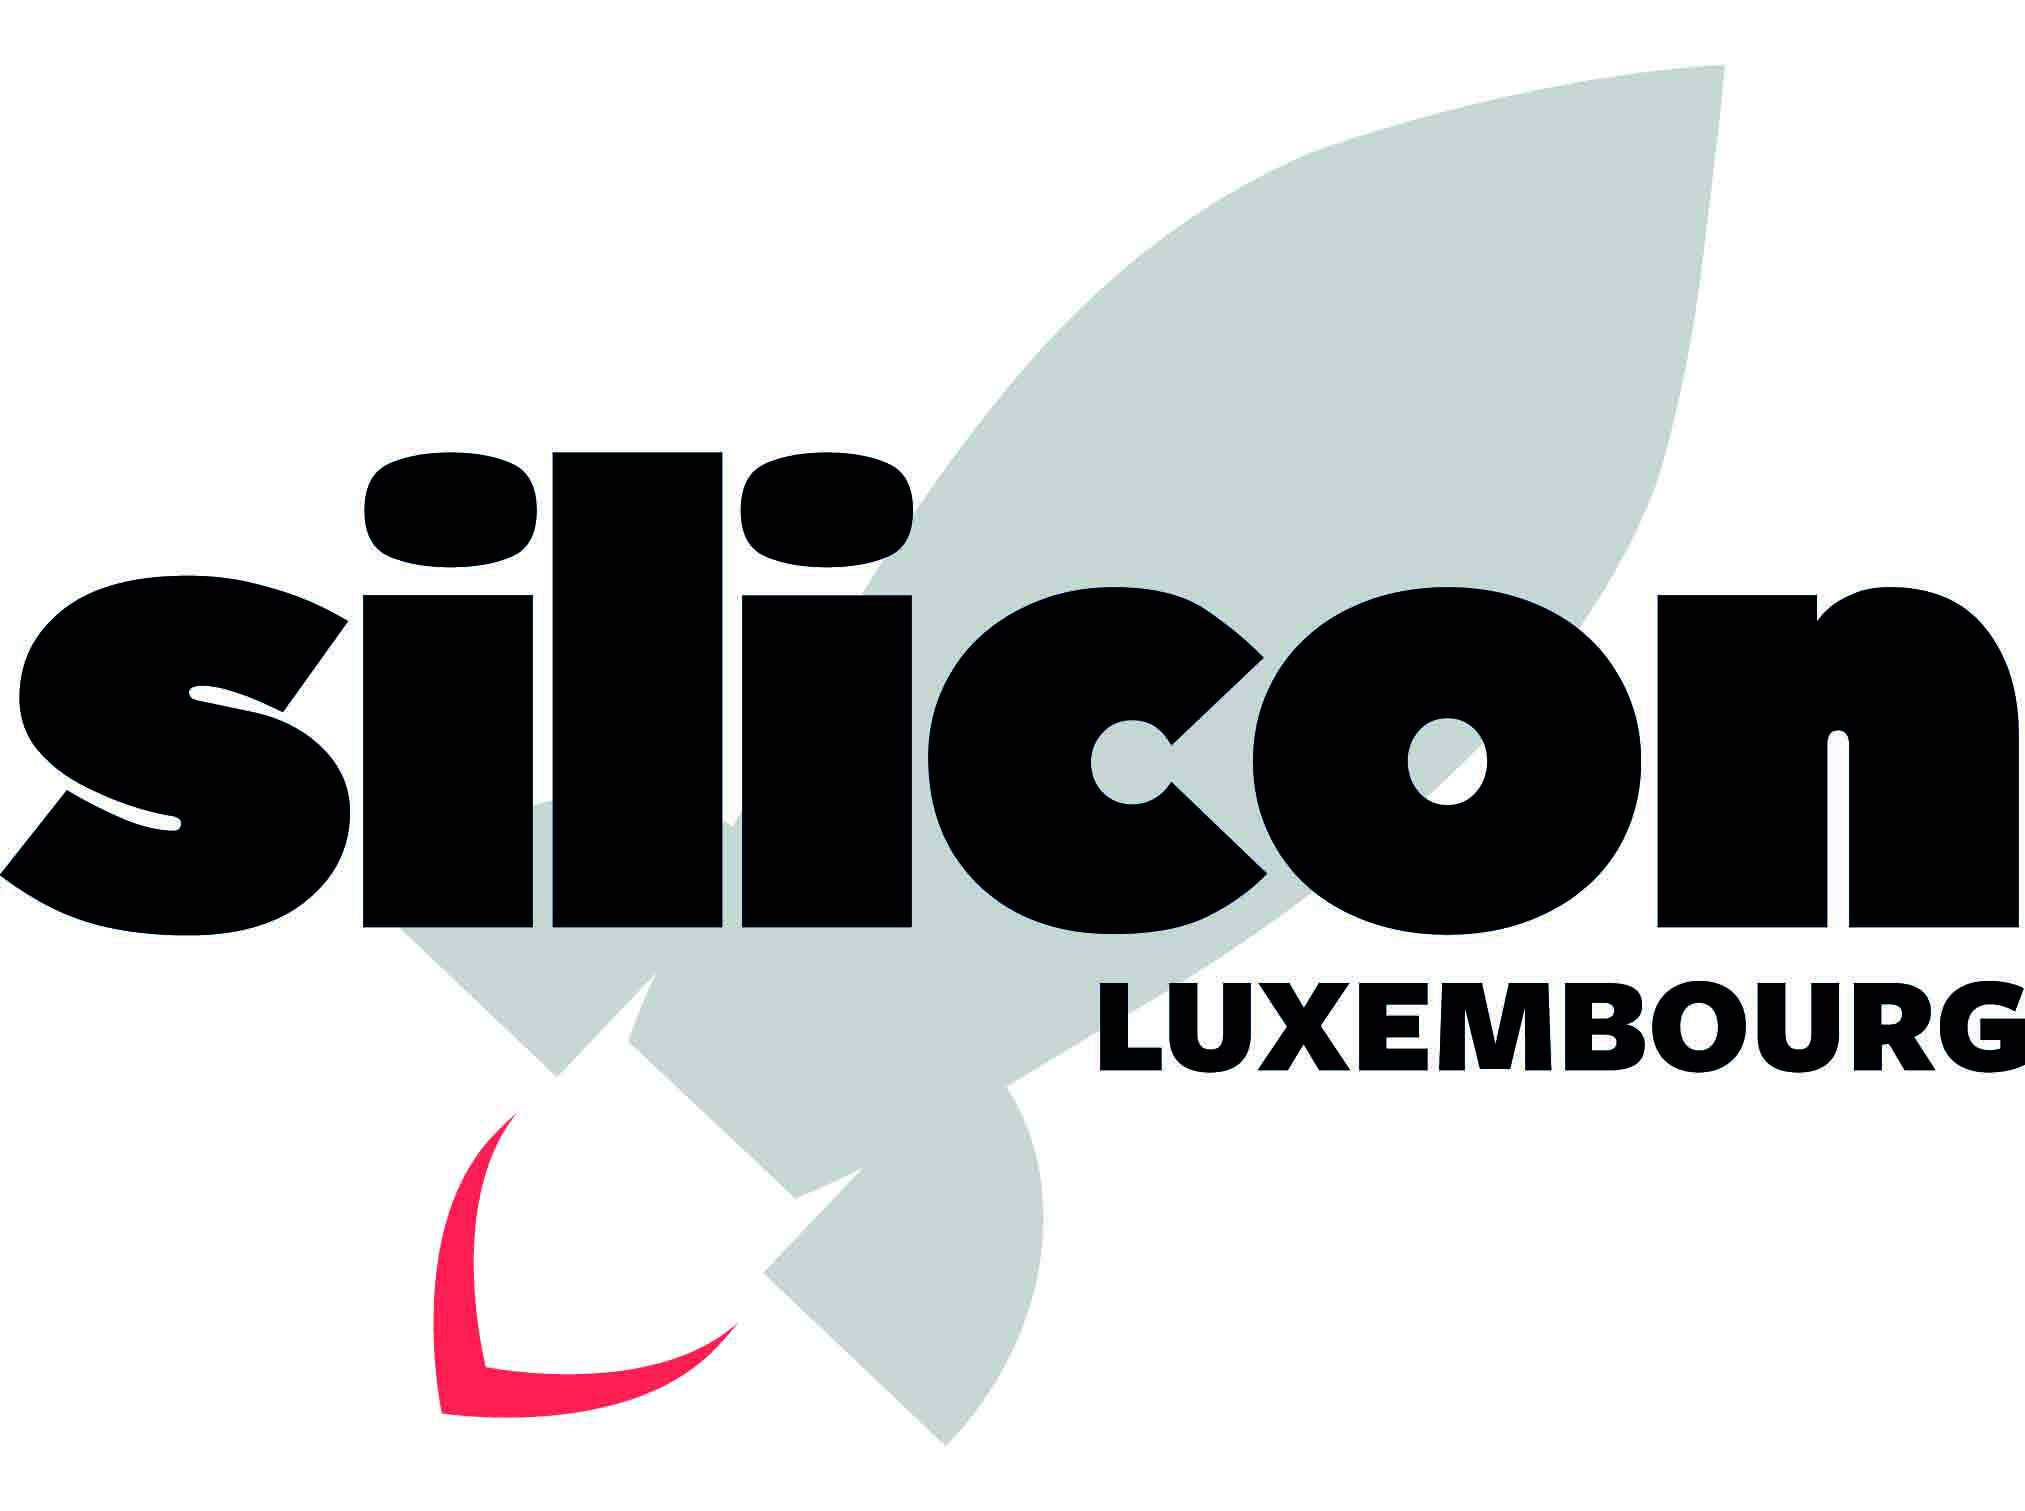 Silicon Luxembourg | Startup news and Digital stories in Luxembourg